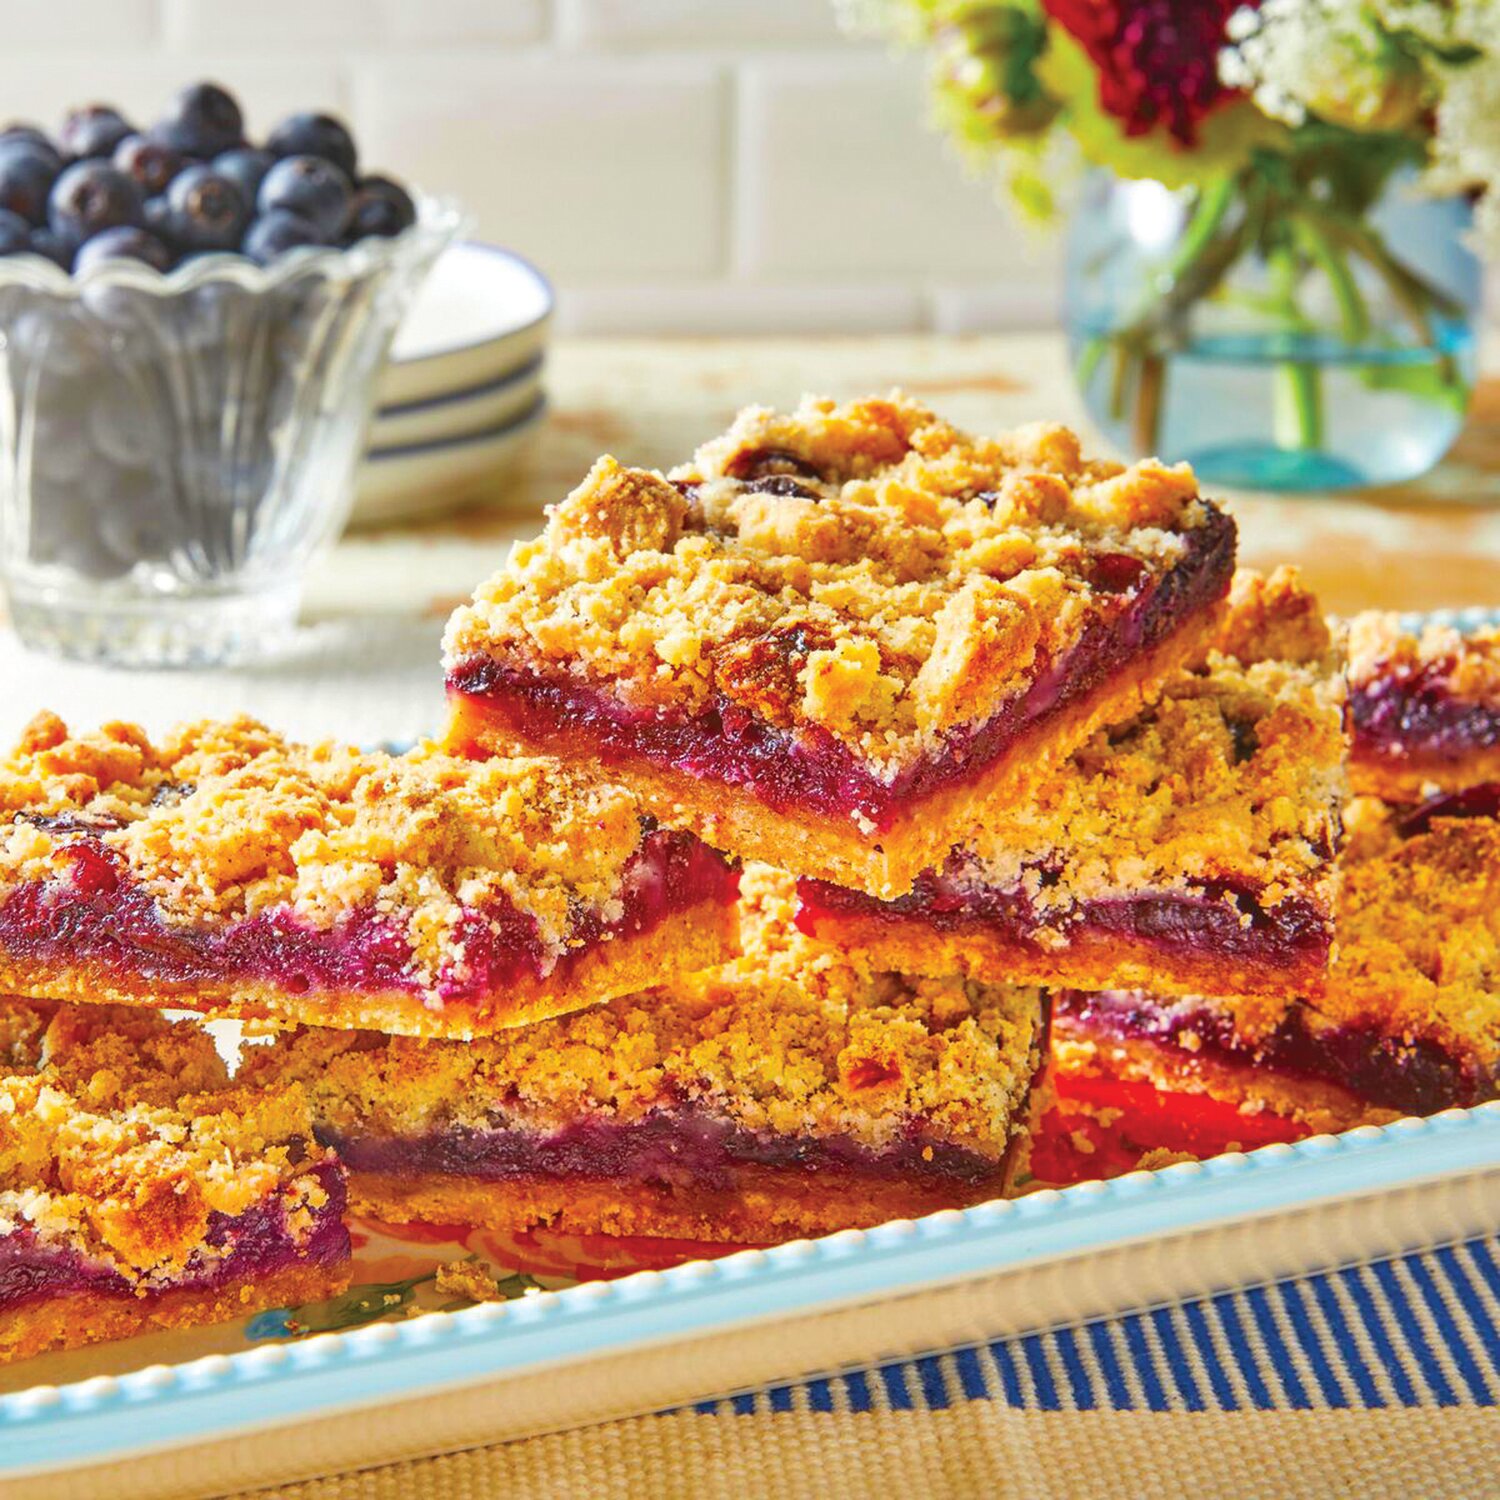 Now that the local blueberry season has arrived, consider blueberry bars as a Fourth of July dessert.